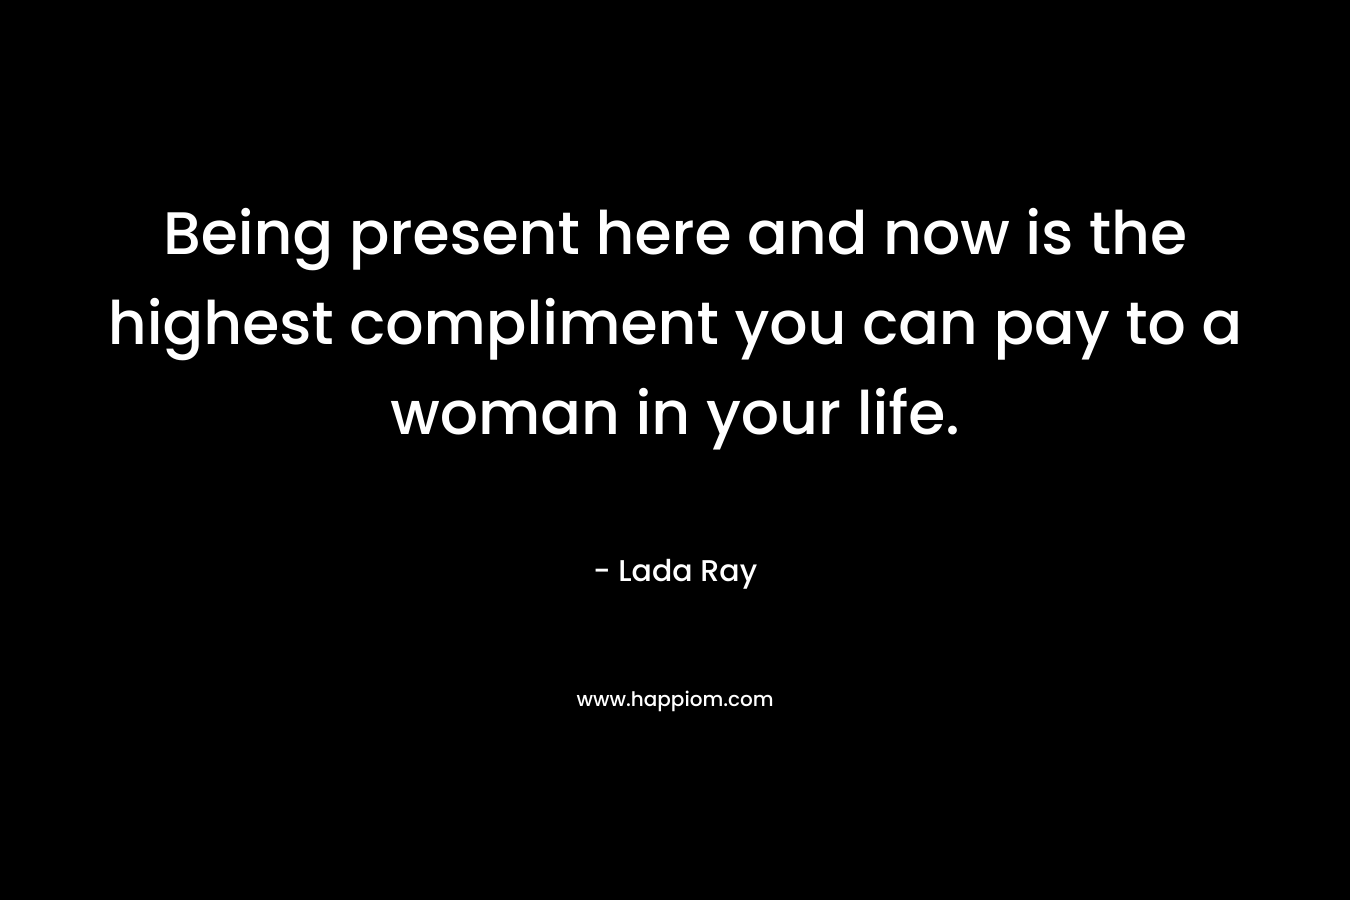 Being present here and now is the highest compliment you can pay to a woman in your life. – Lada Ray